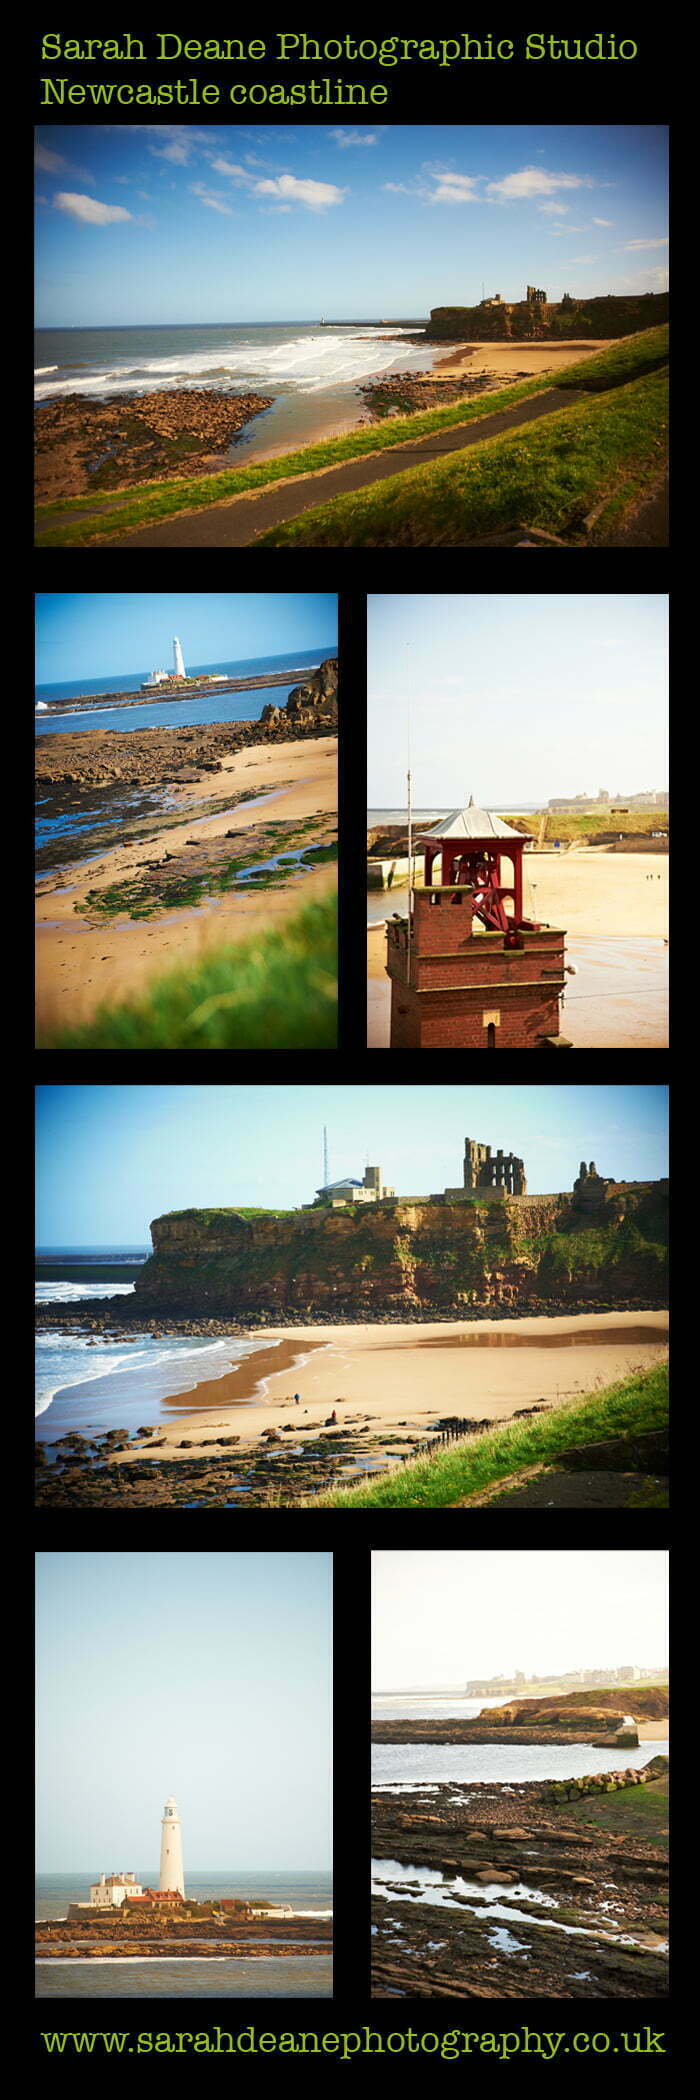 newcastle coastline, whitley bay, cullercoats, tynemout